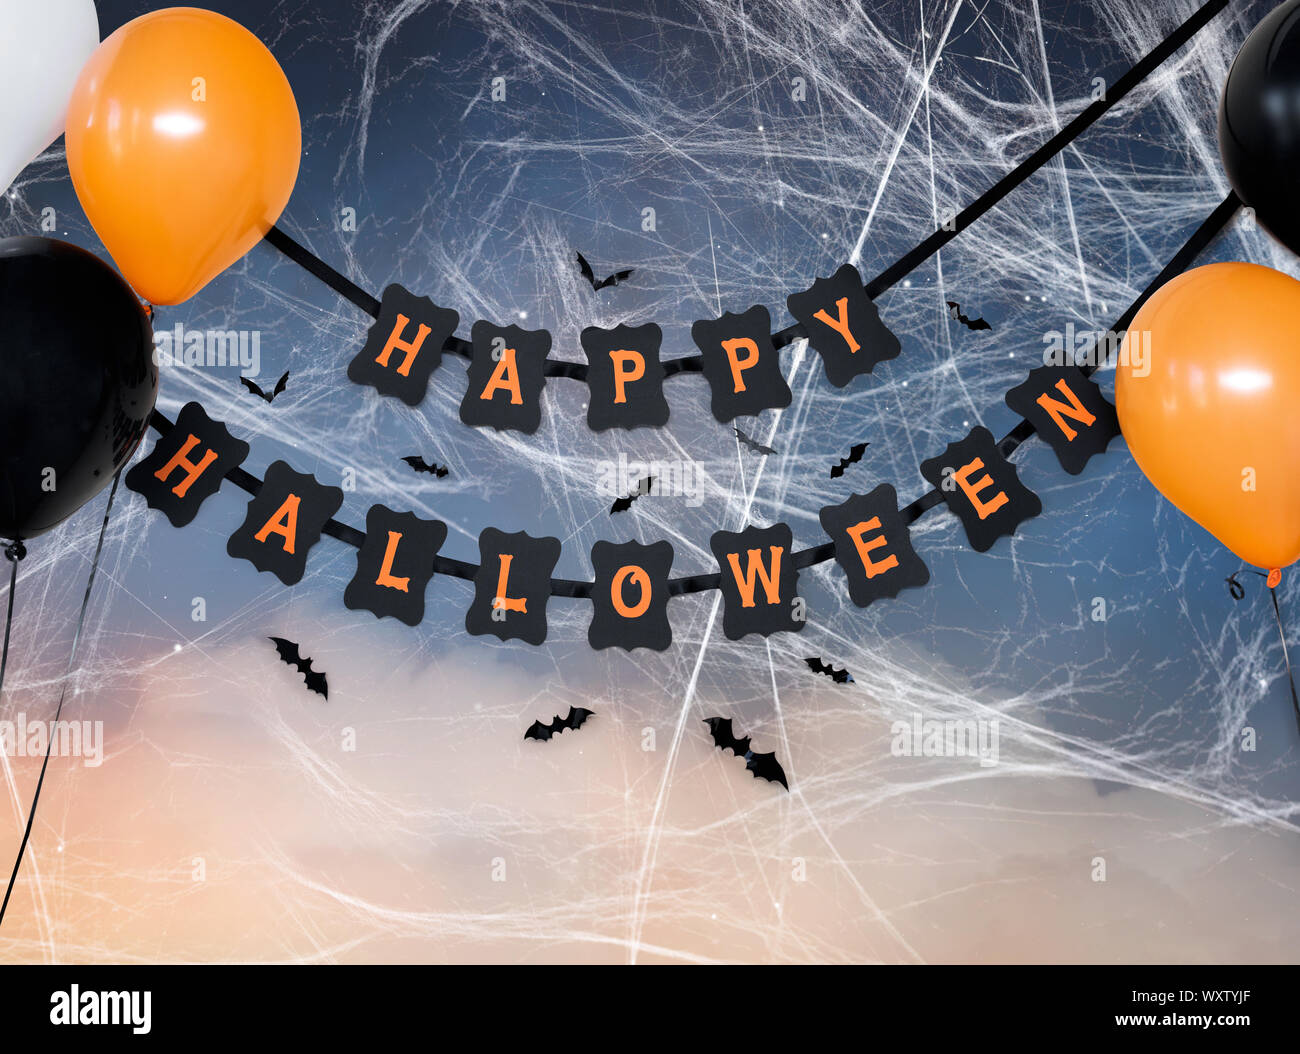 holidays, decoration and party concept - happy halloween festive paper black garland or banner with air balloons, spiderweb and bats over starry night Stock Photo